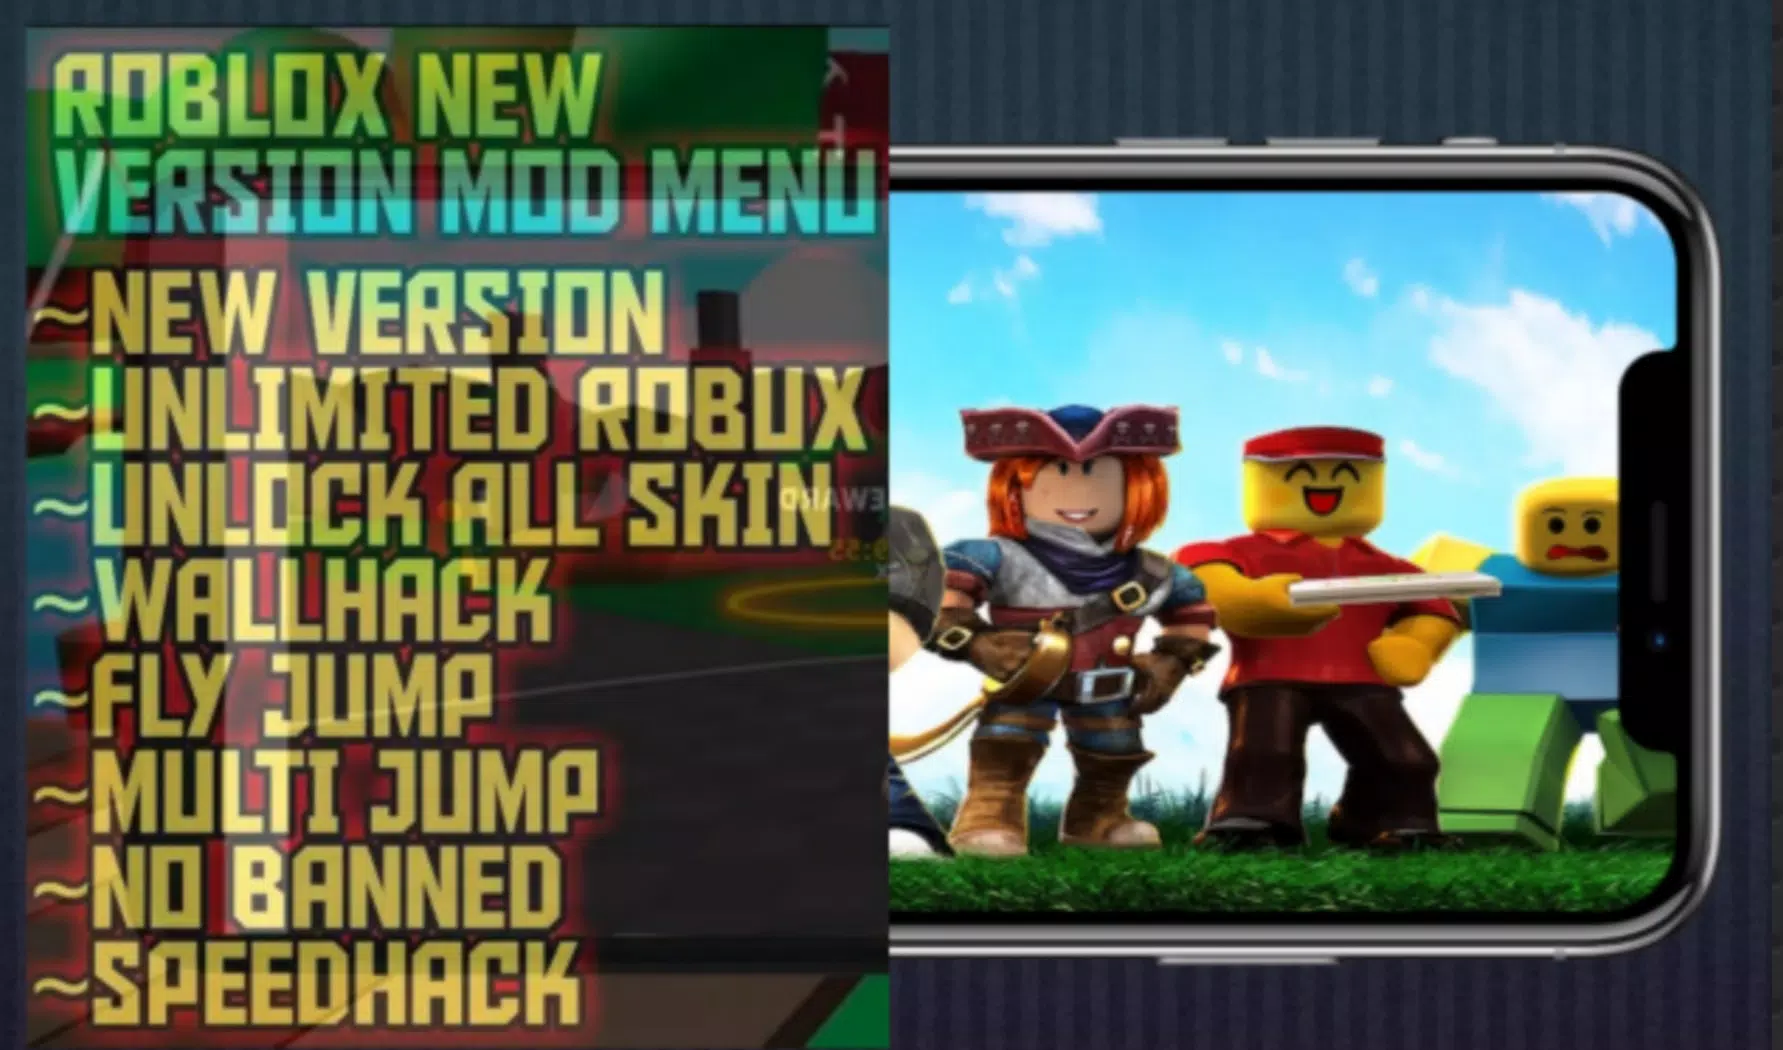 Roblox MOD Menu APK Download for Android Free